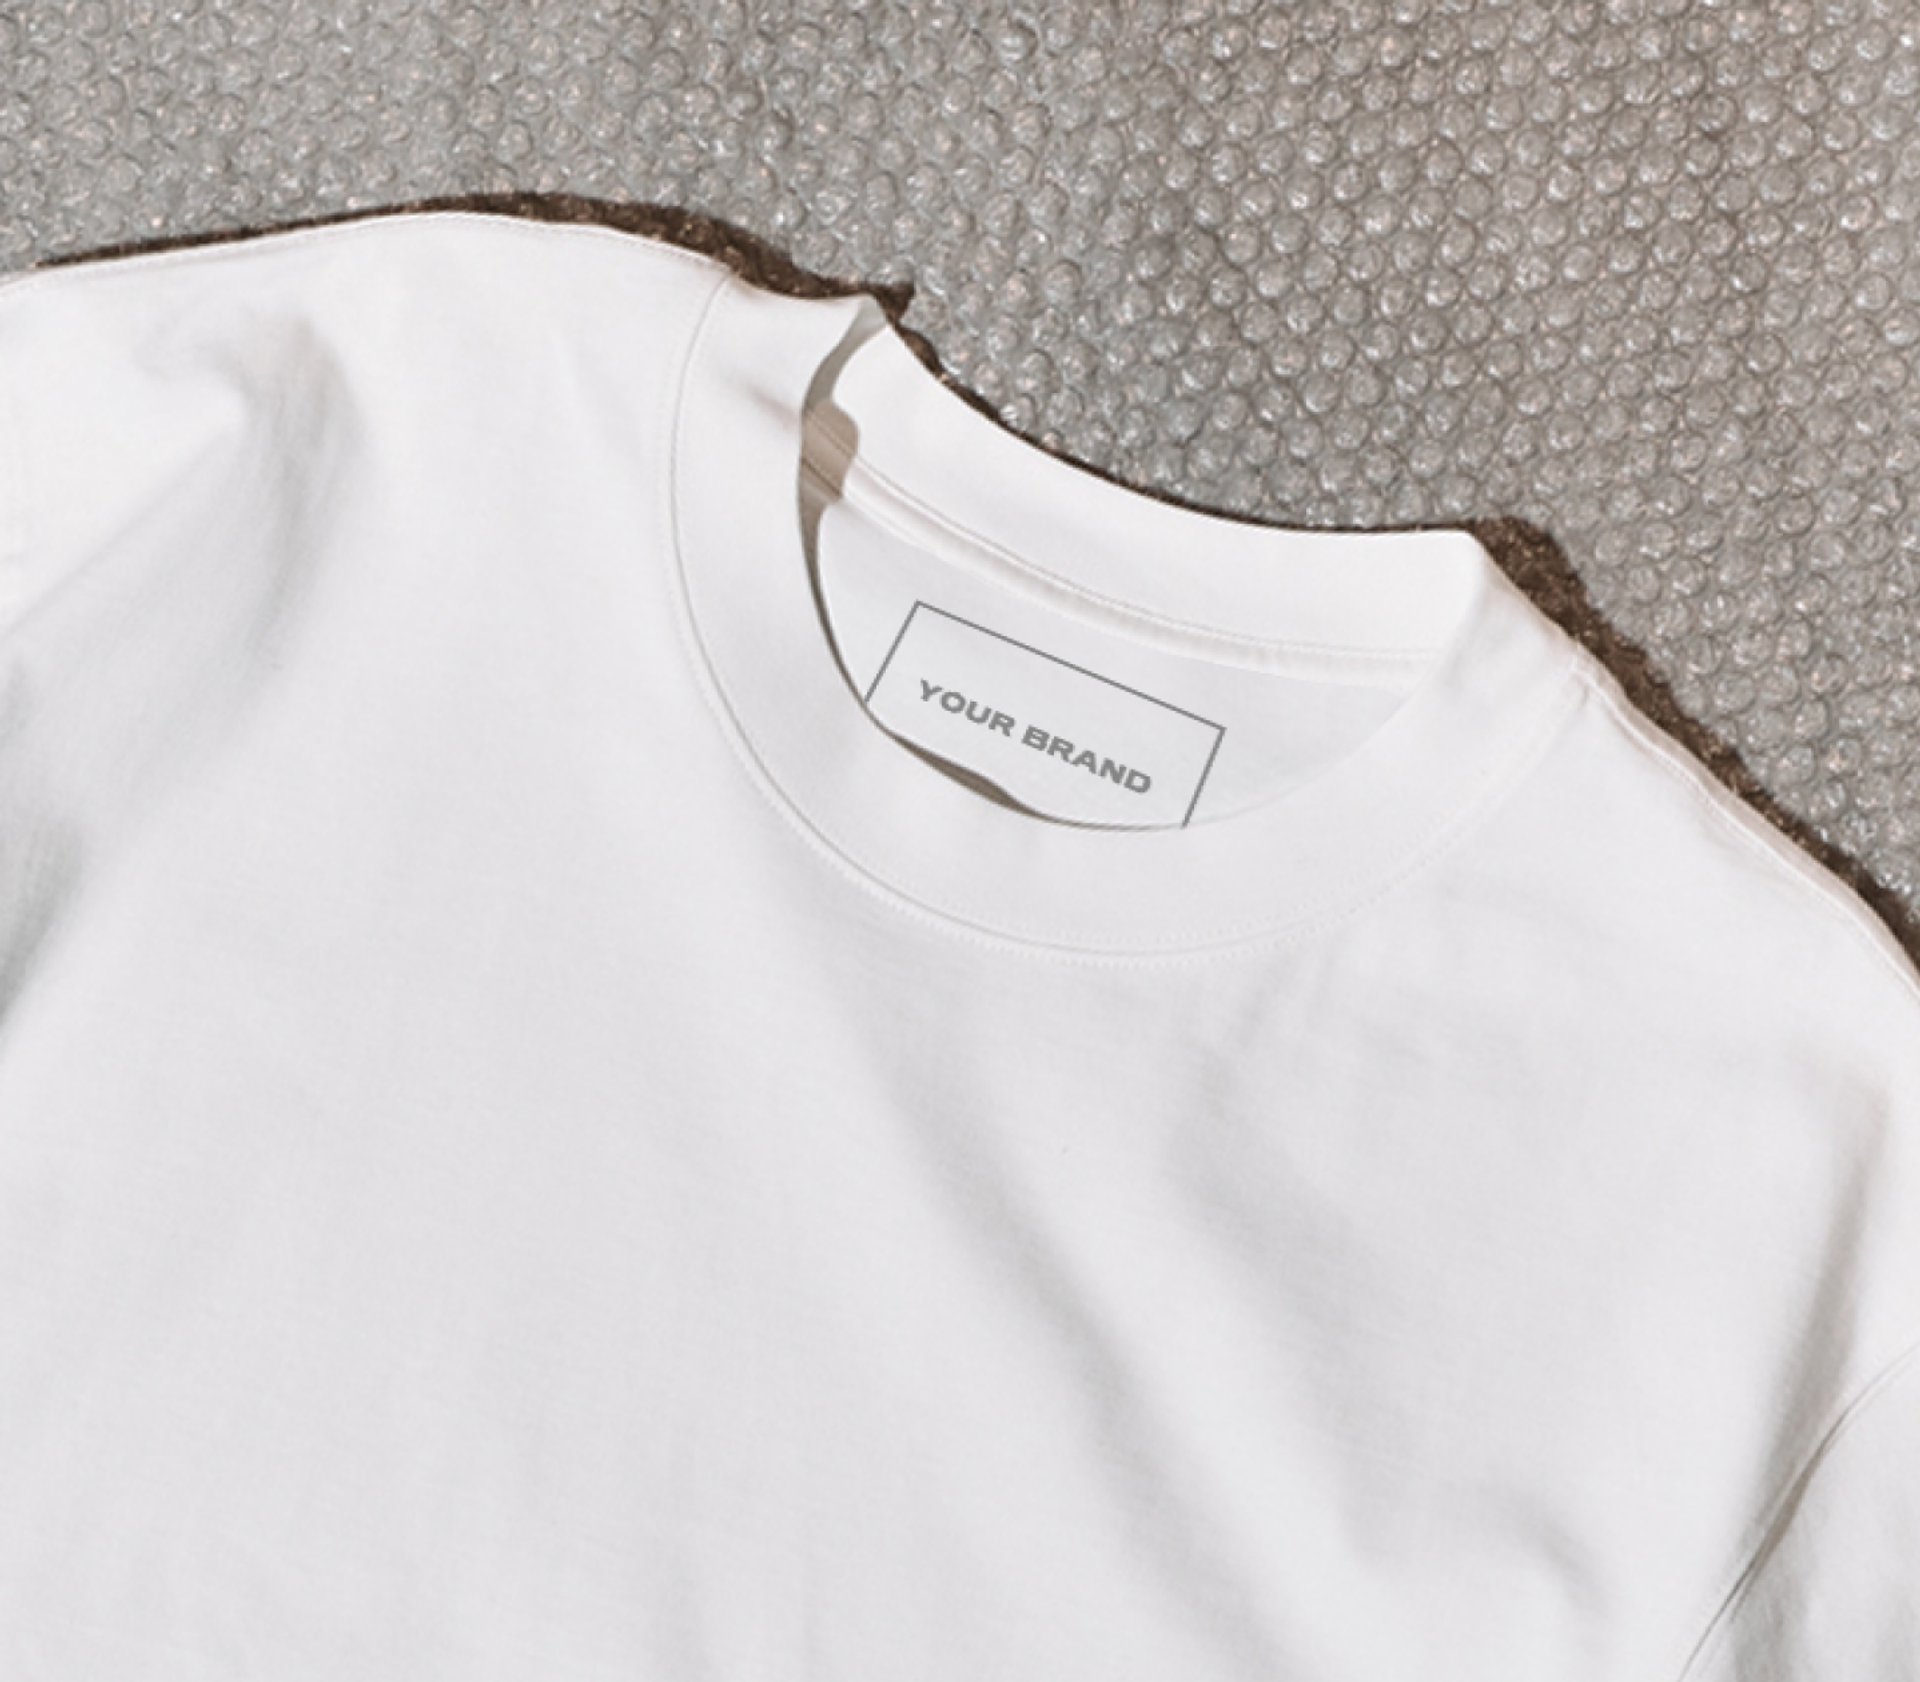 A white T-shirt blank for your brand